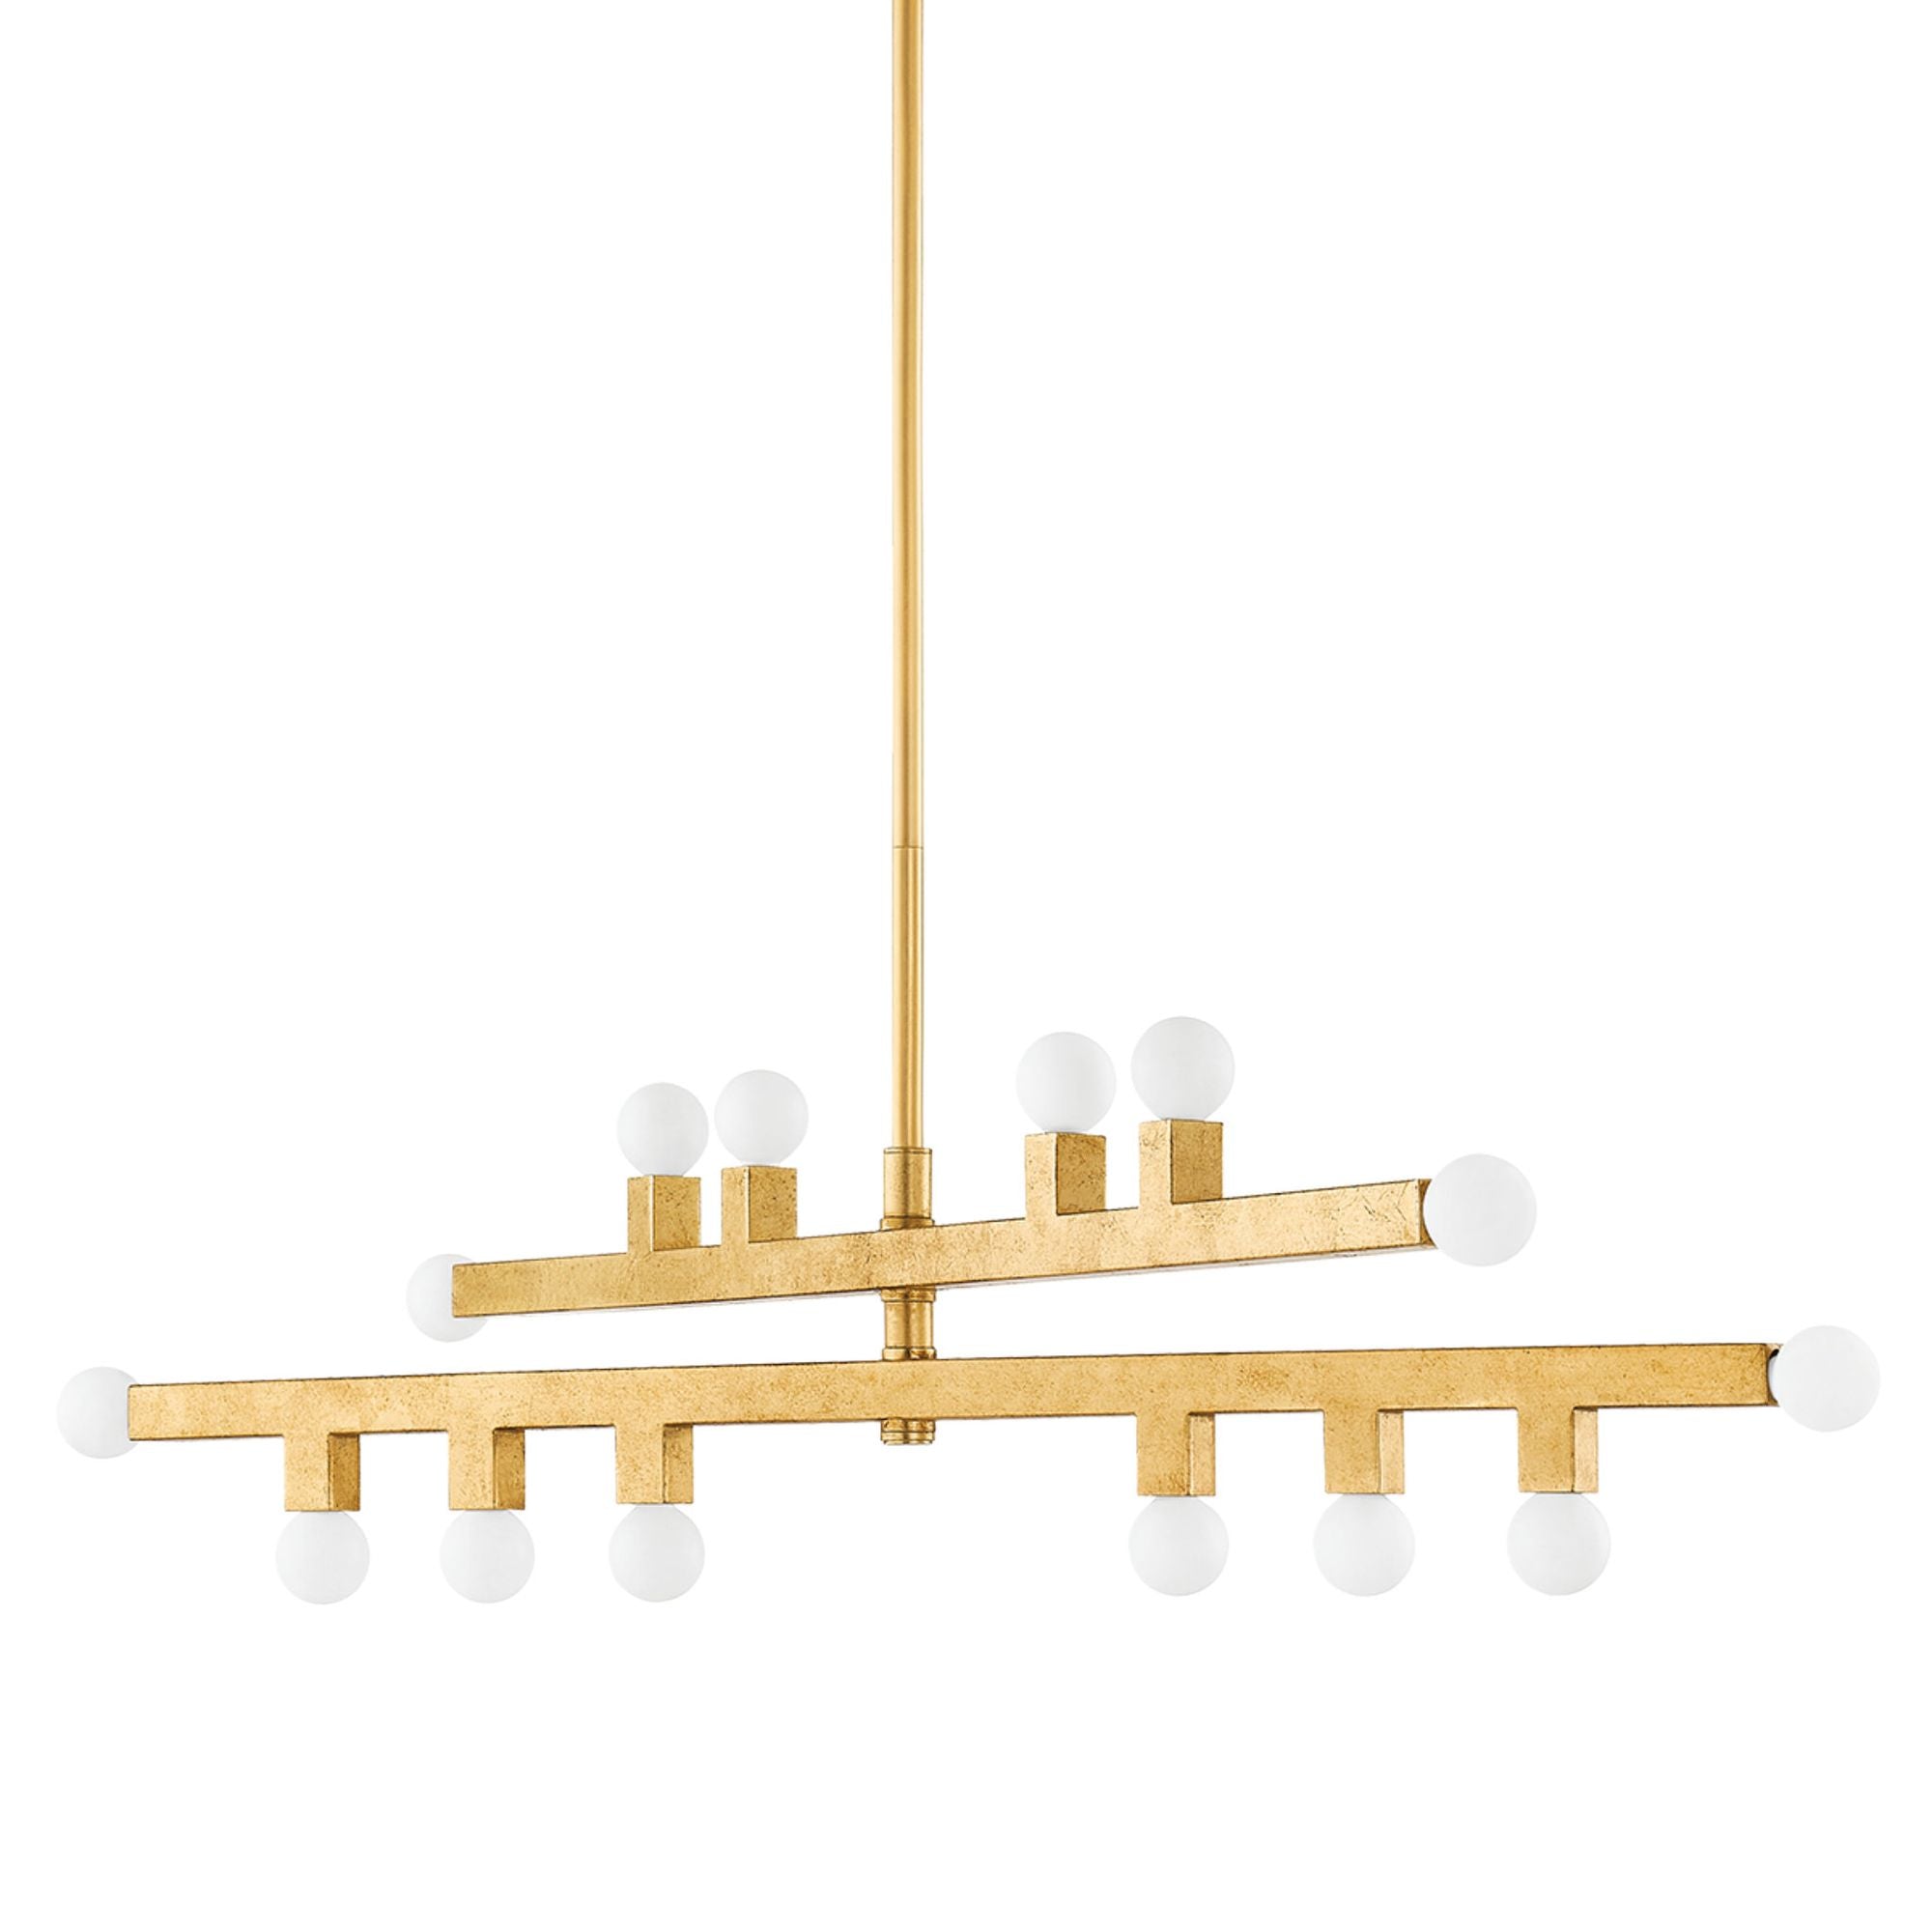 Sutter 14-Light Chandelier in Vintage Gold Leaf by The Lifestyled Co